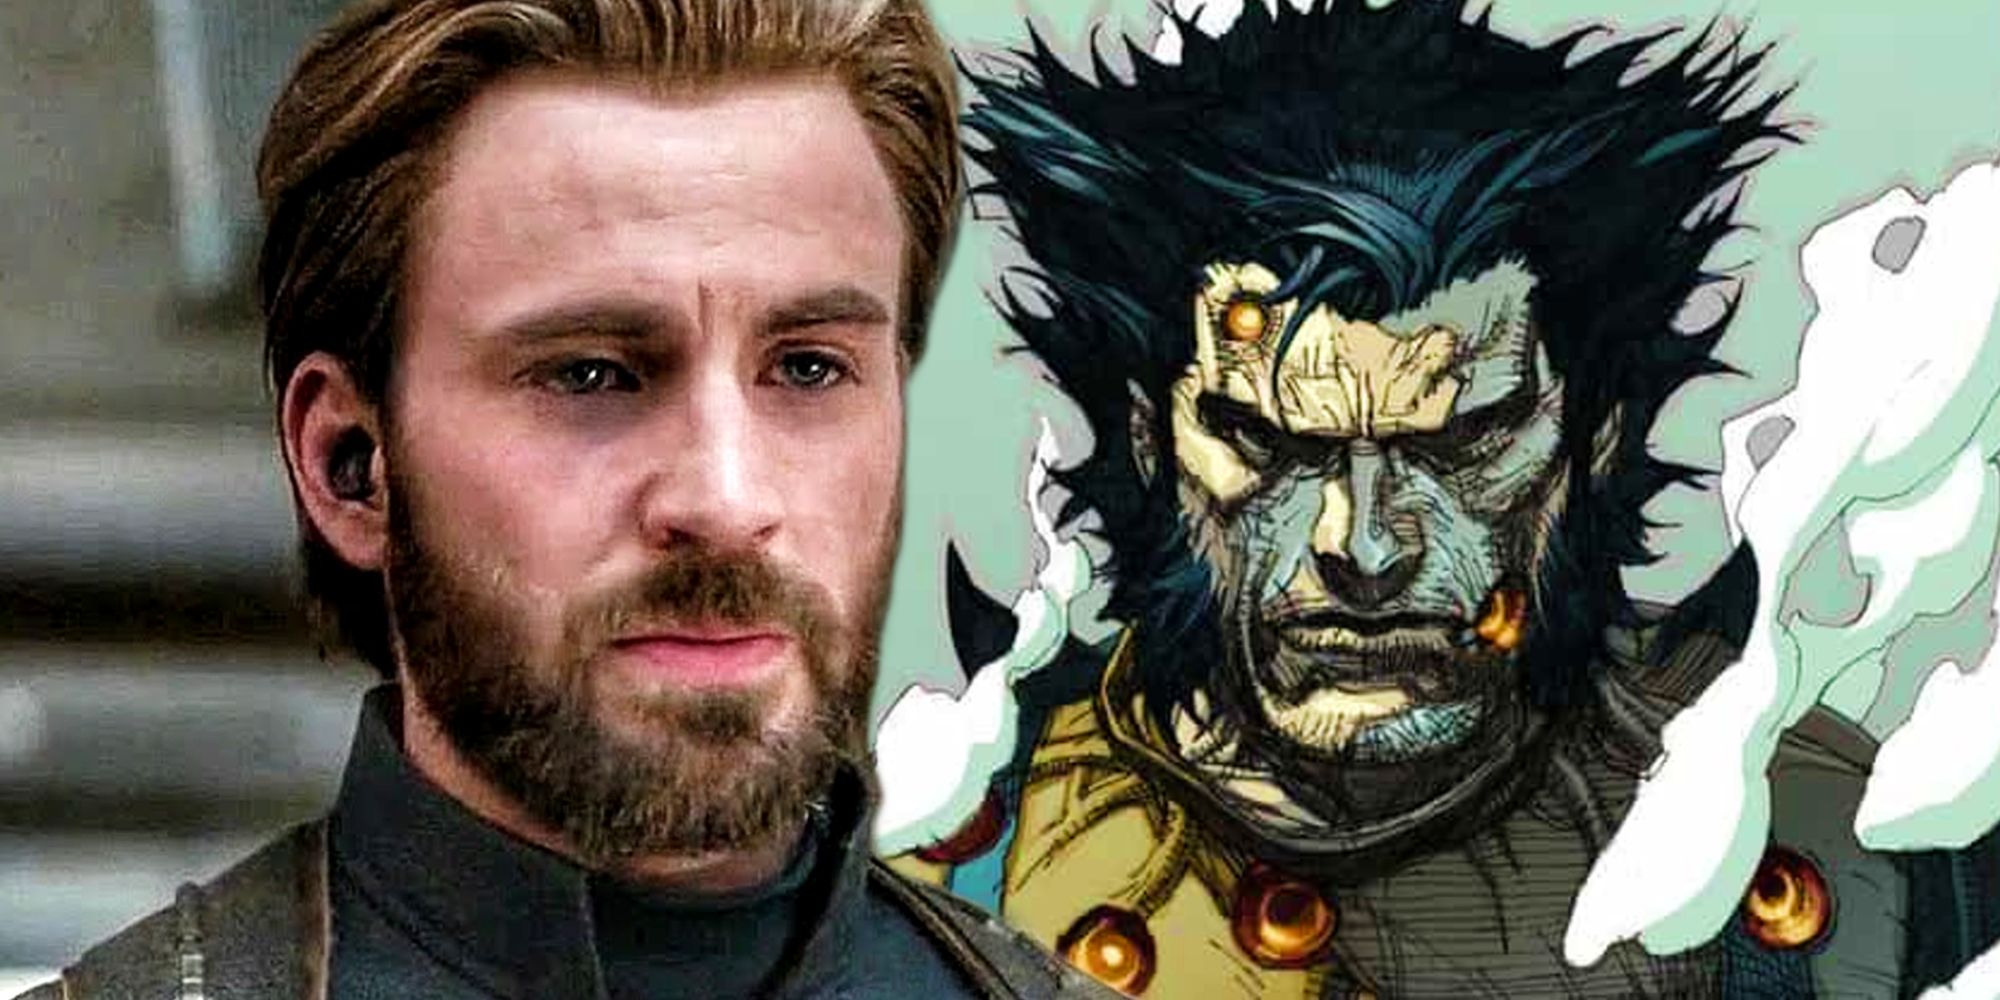 Chris Evans as Captain America (left) comic book Wolverine riddled with bullets (right.)